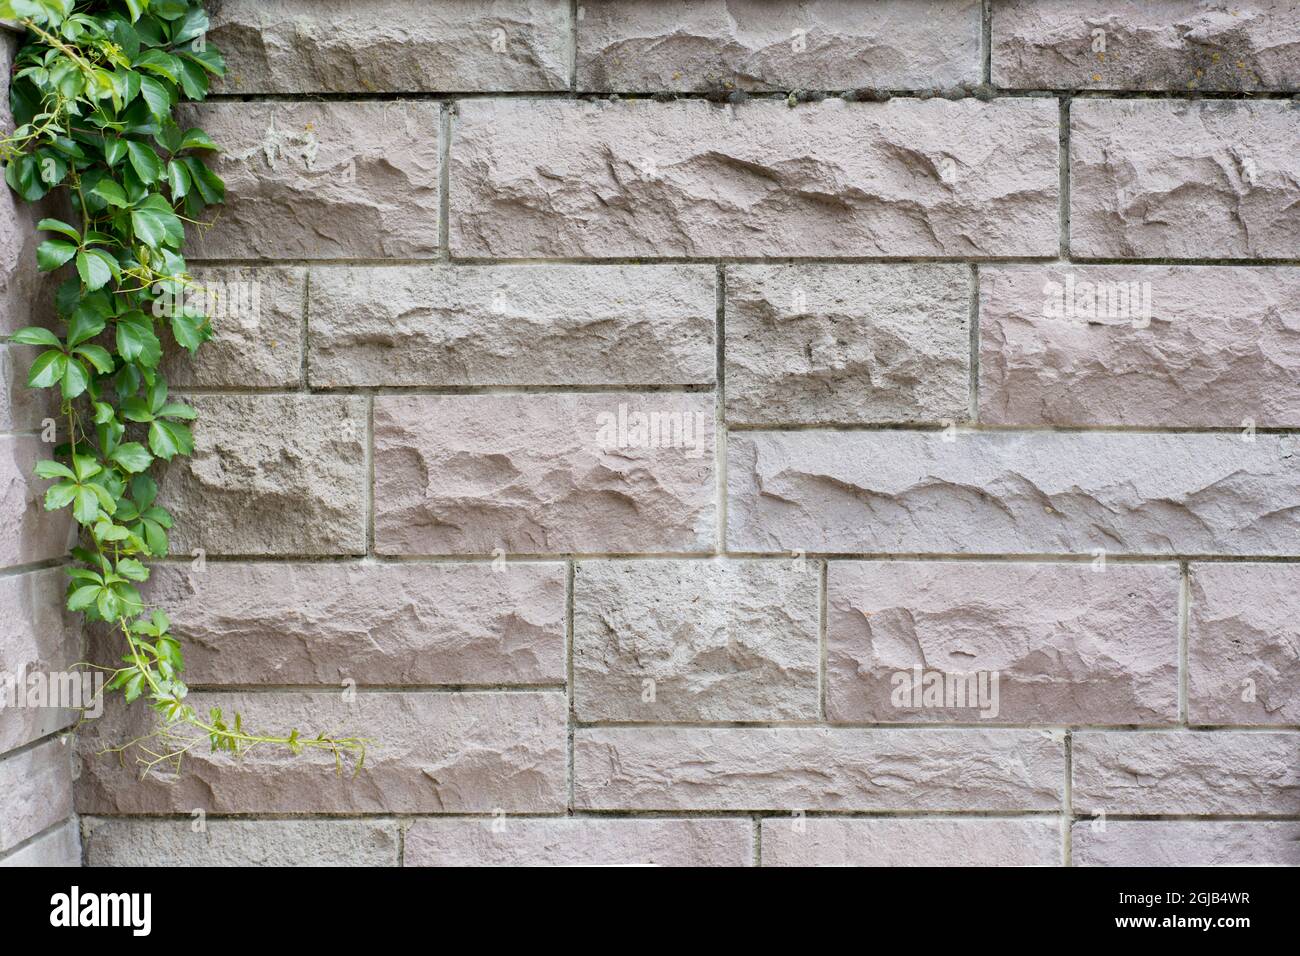 stone veneer garden wall with a leafy green plant hanging from its corner Stock Photo